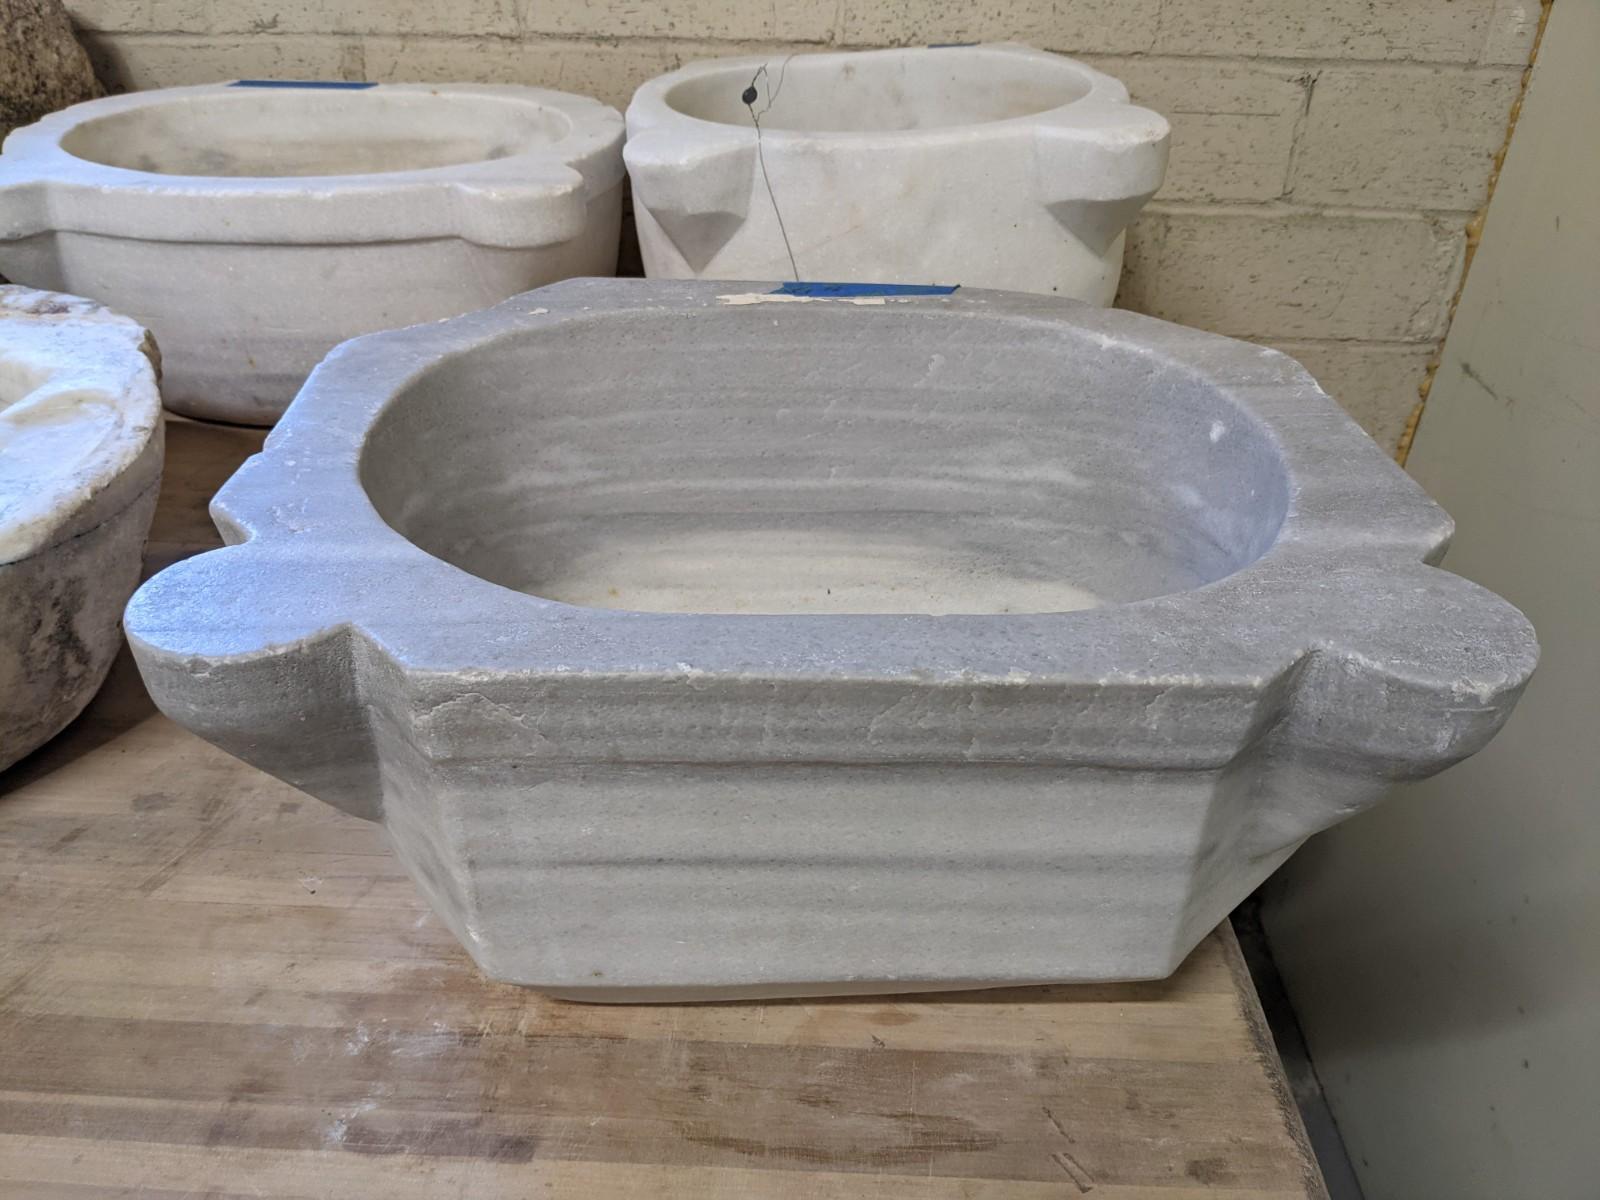 This marble sink origins from Greece, circa 1850.